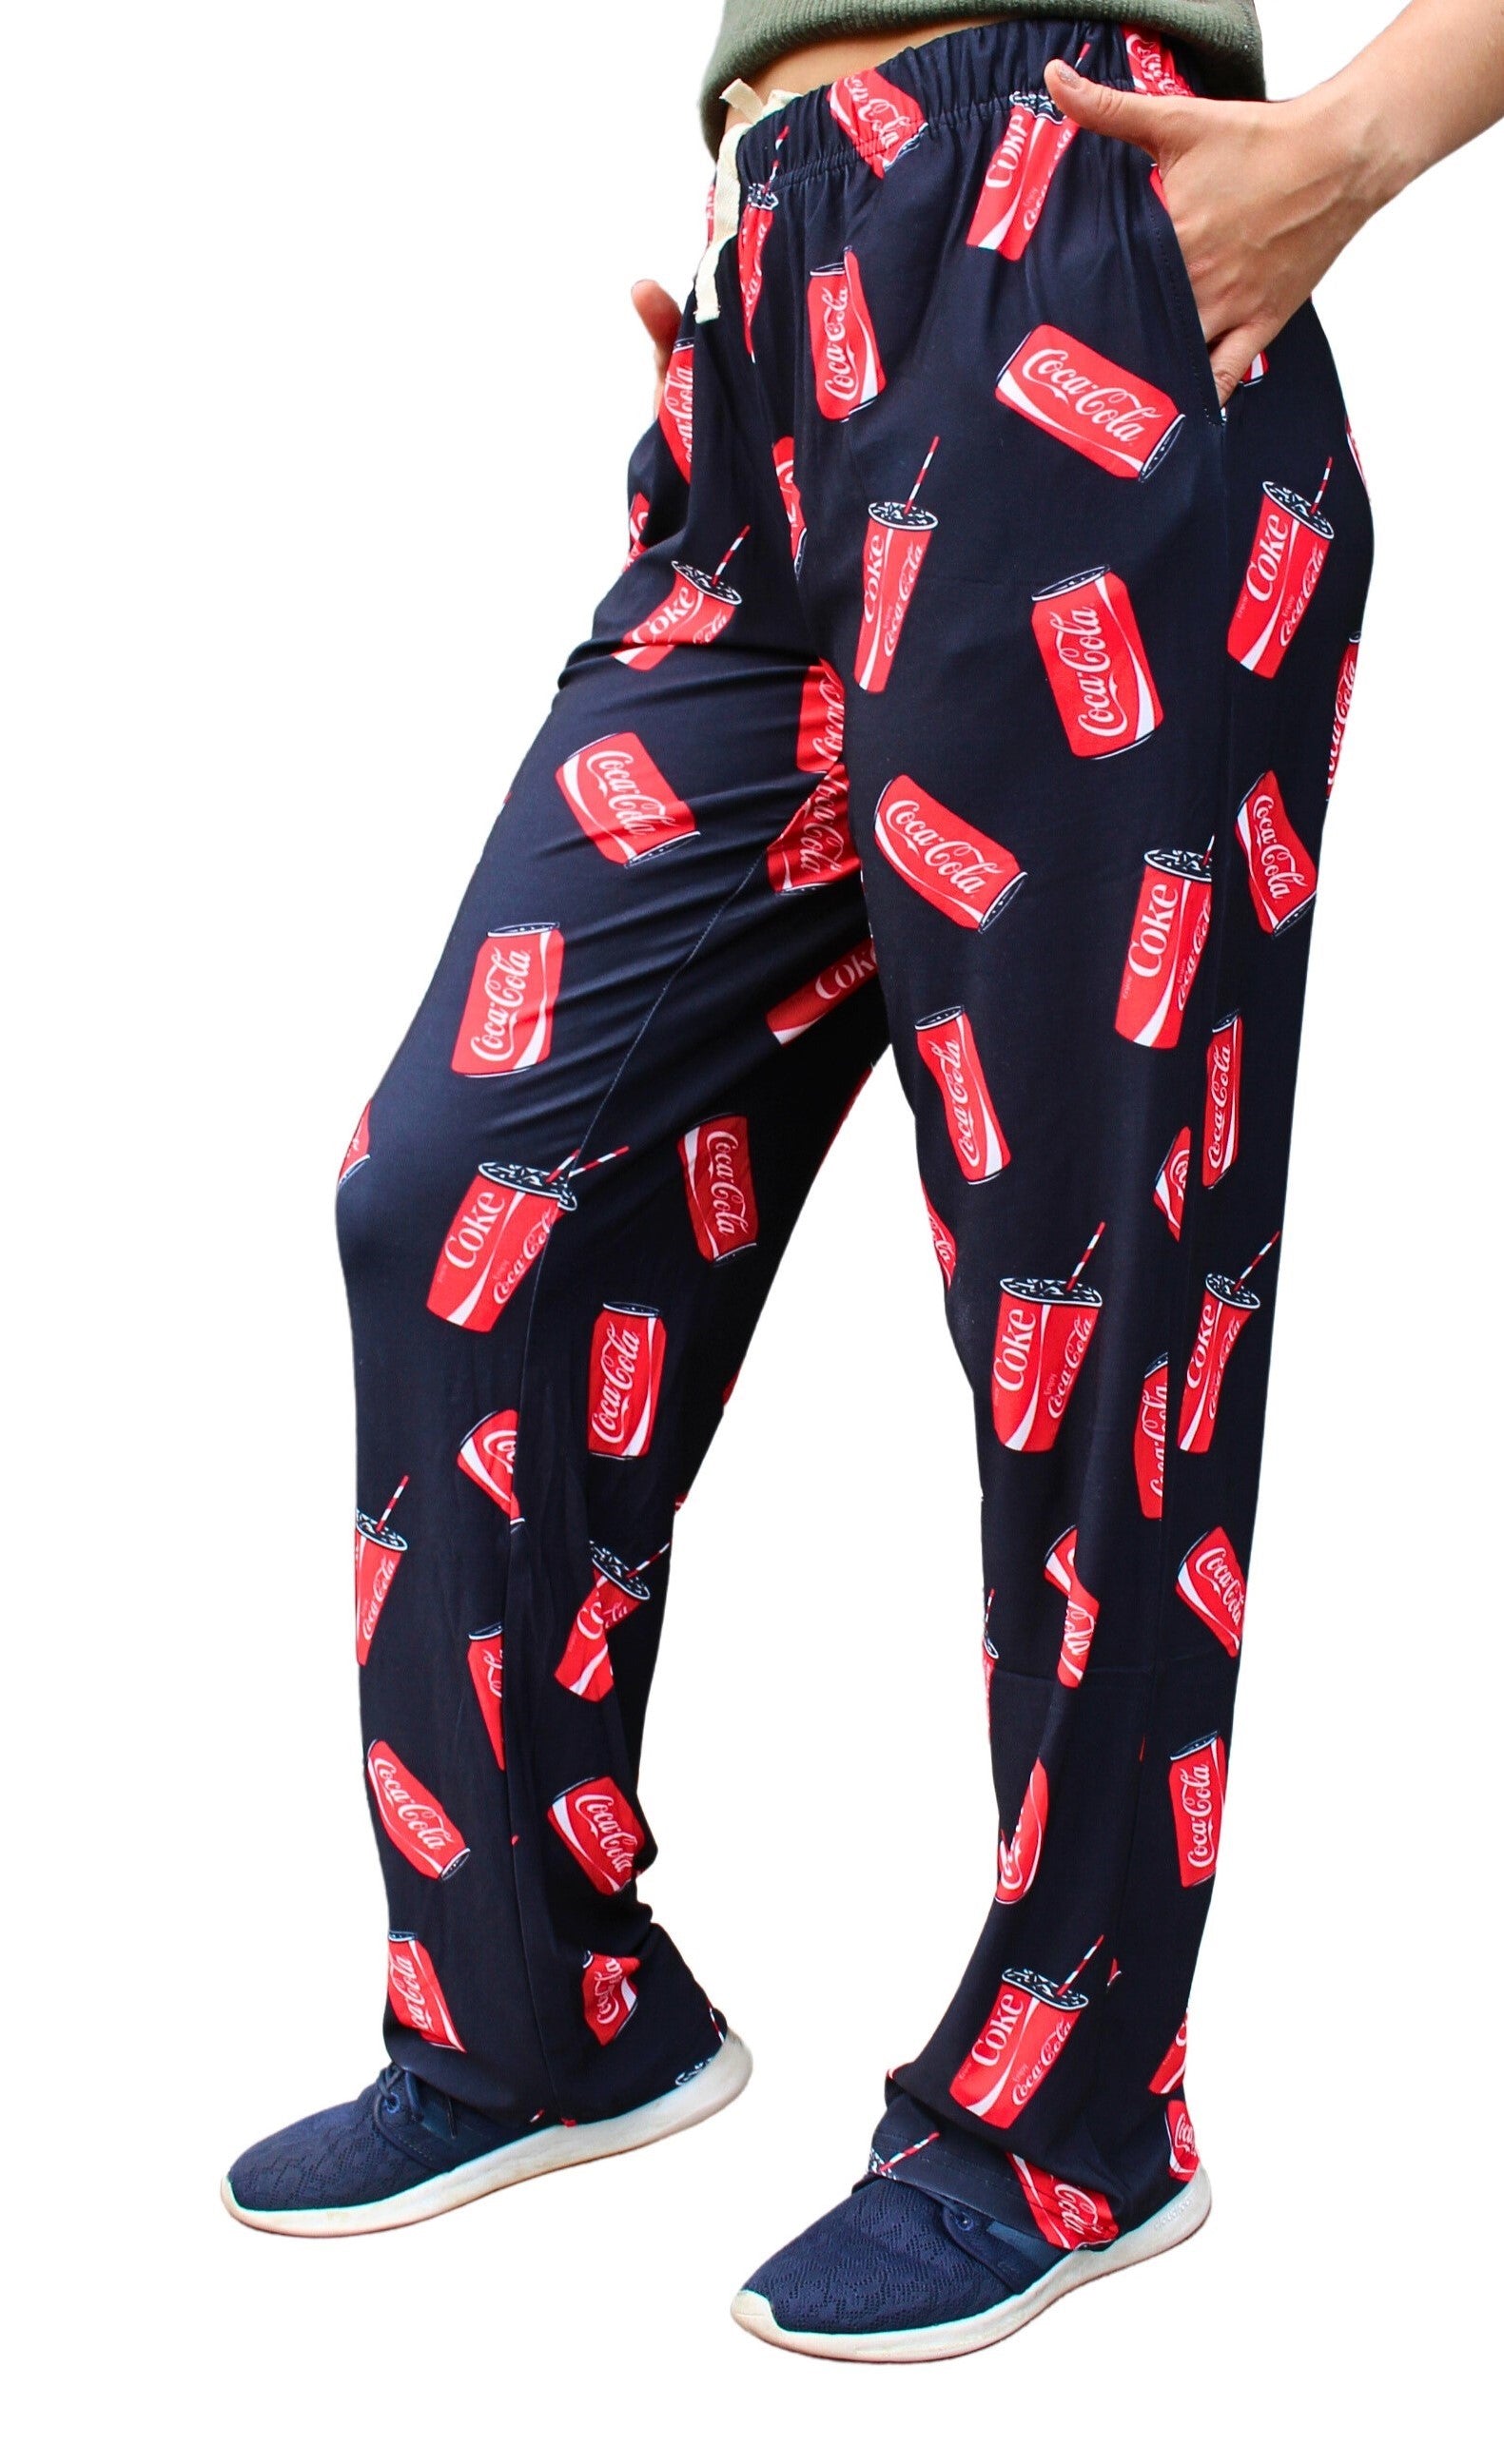 Coca-Cola Can & Cup Pattern Pajama Lounge Pants on model left side view shot 2